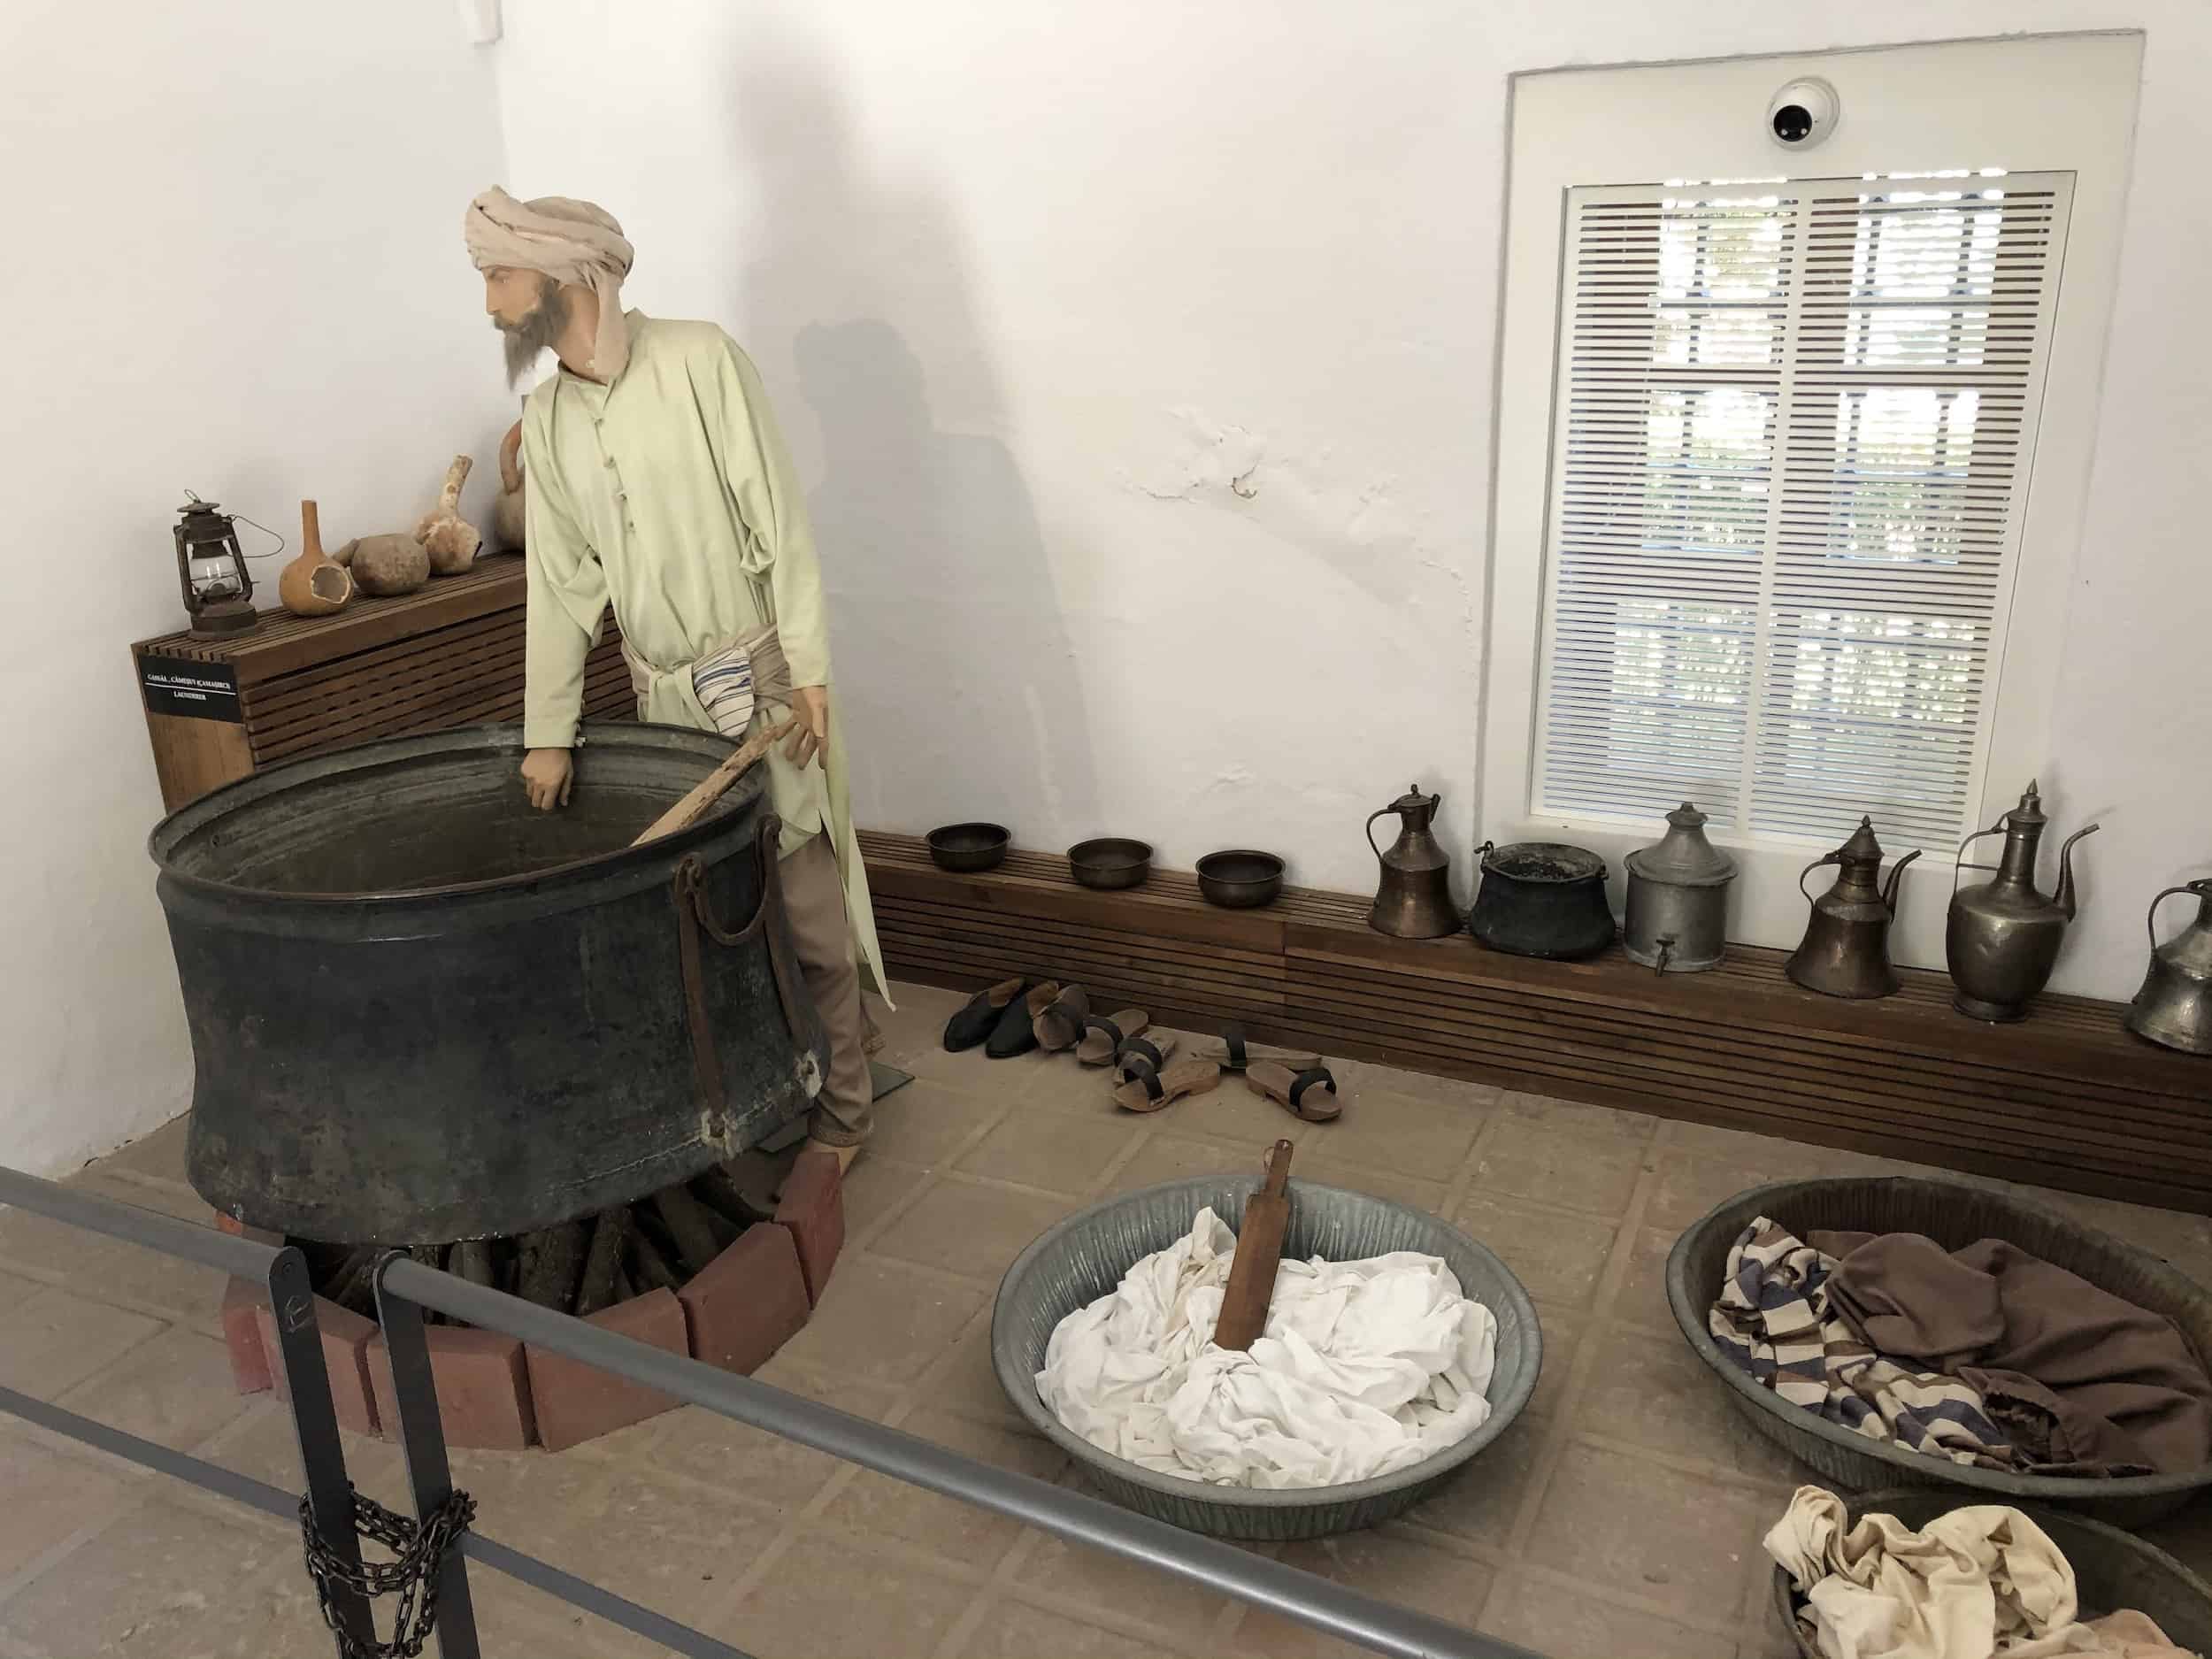 Laundry at the Complex of Bayezid II Health Museum in Edirne, Turkey